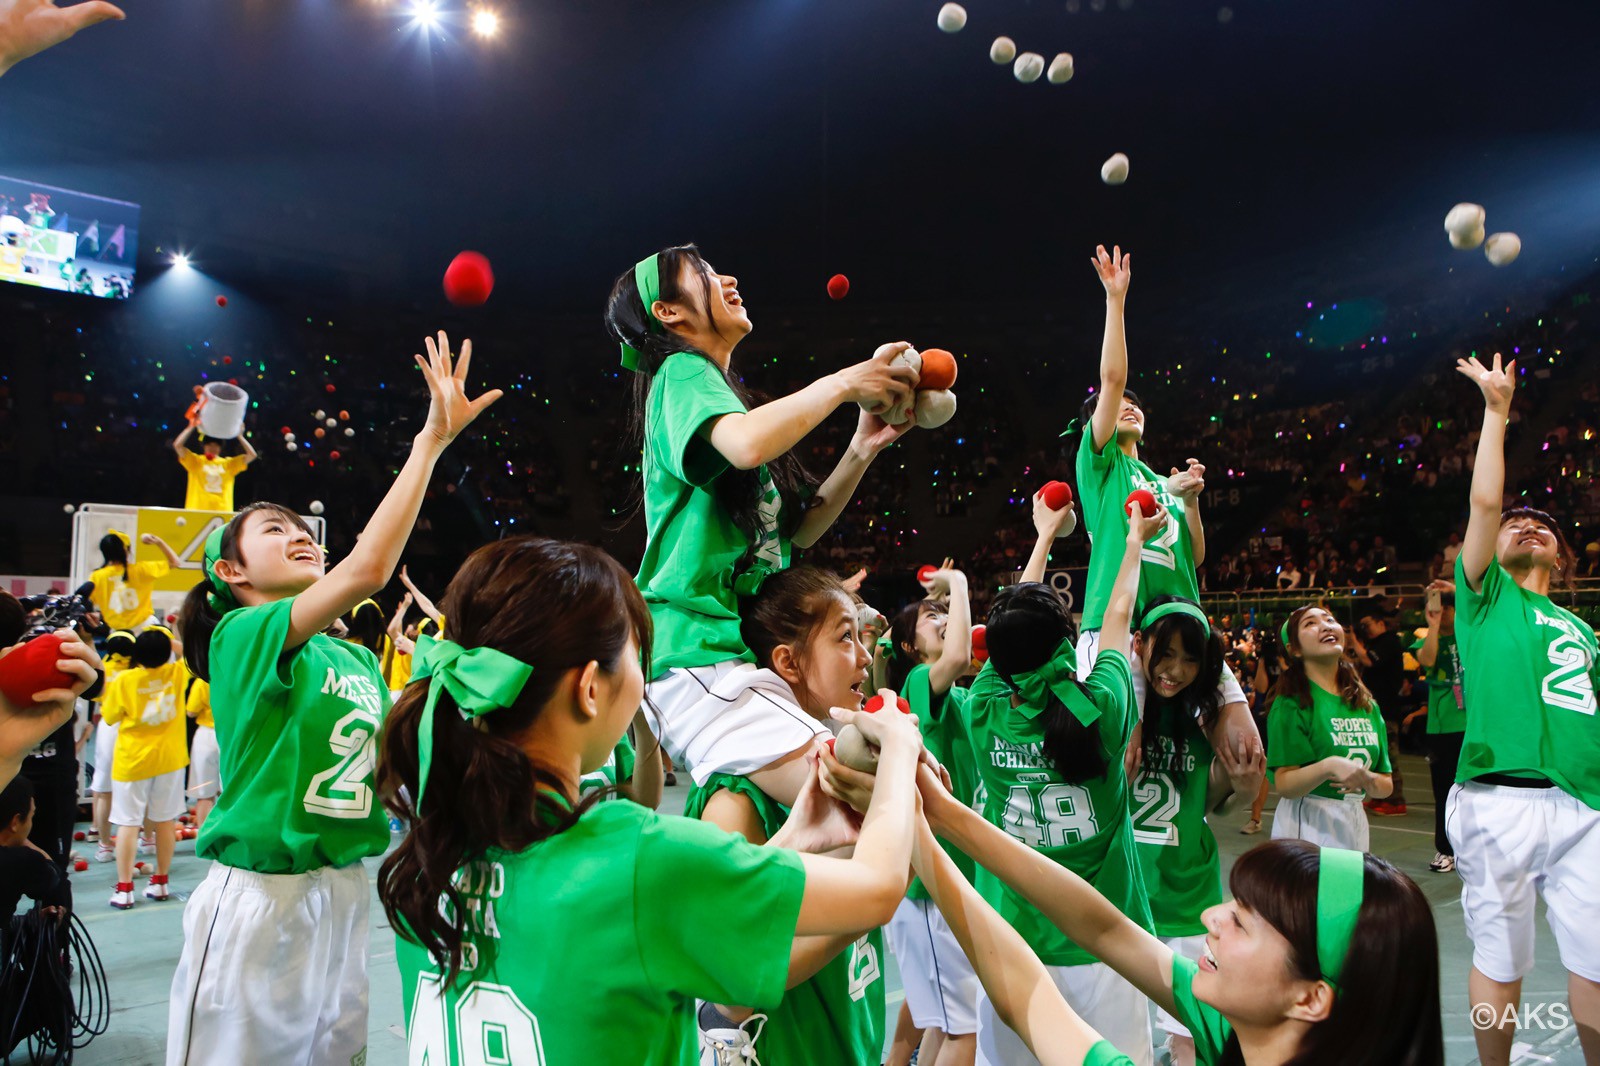 AKB48 Tests Their New Team! The Girl’s Second Sports Day Begins